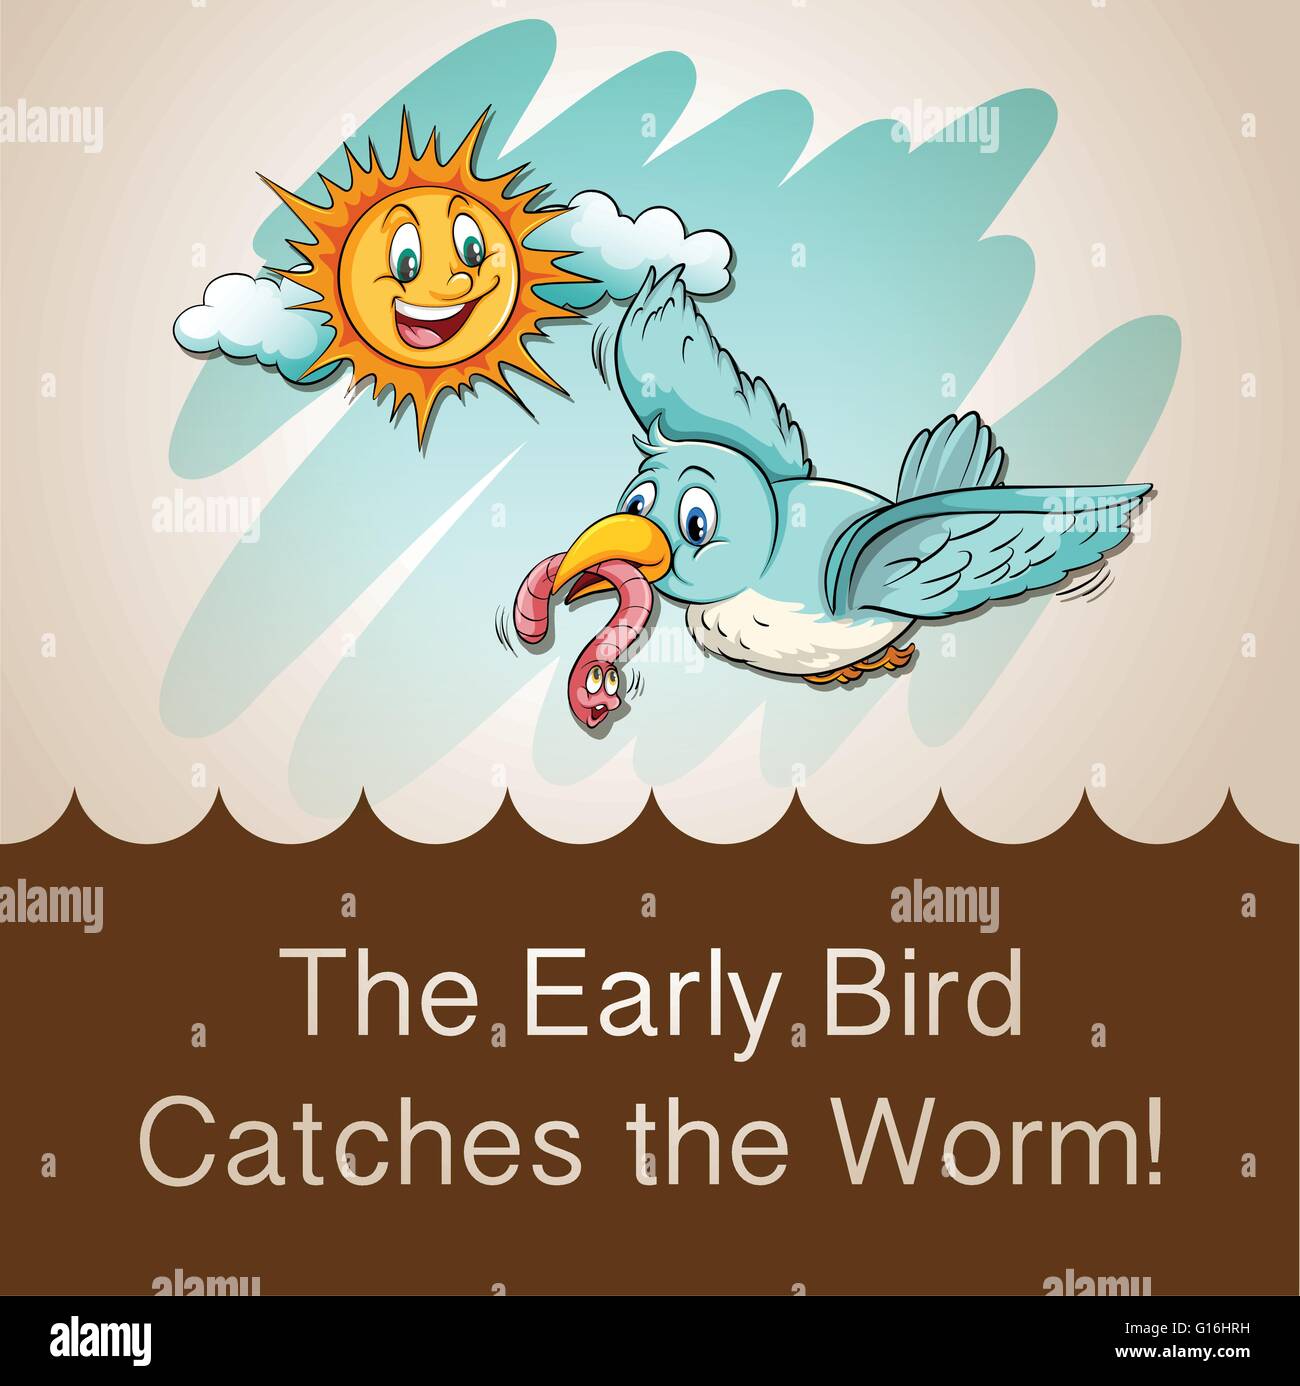 Idiom saying the early bird catches the worm Stock Vector